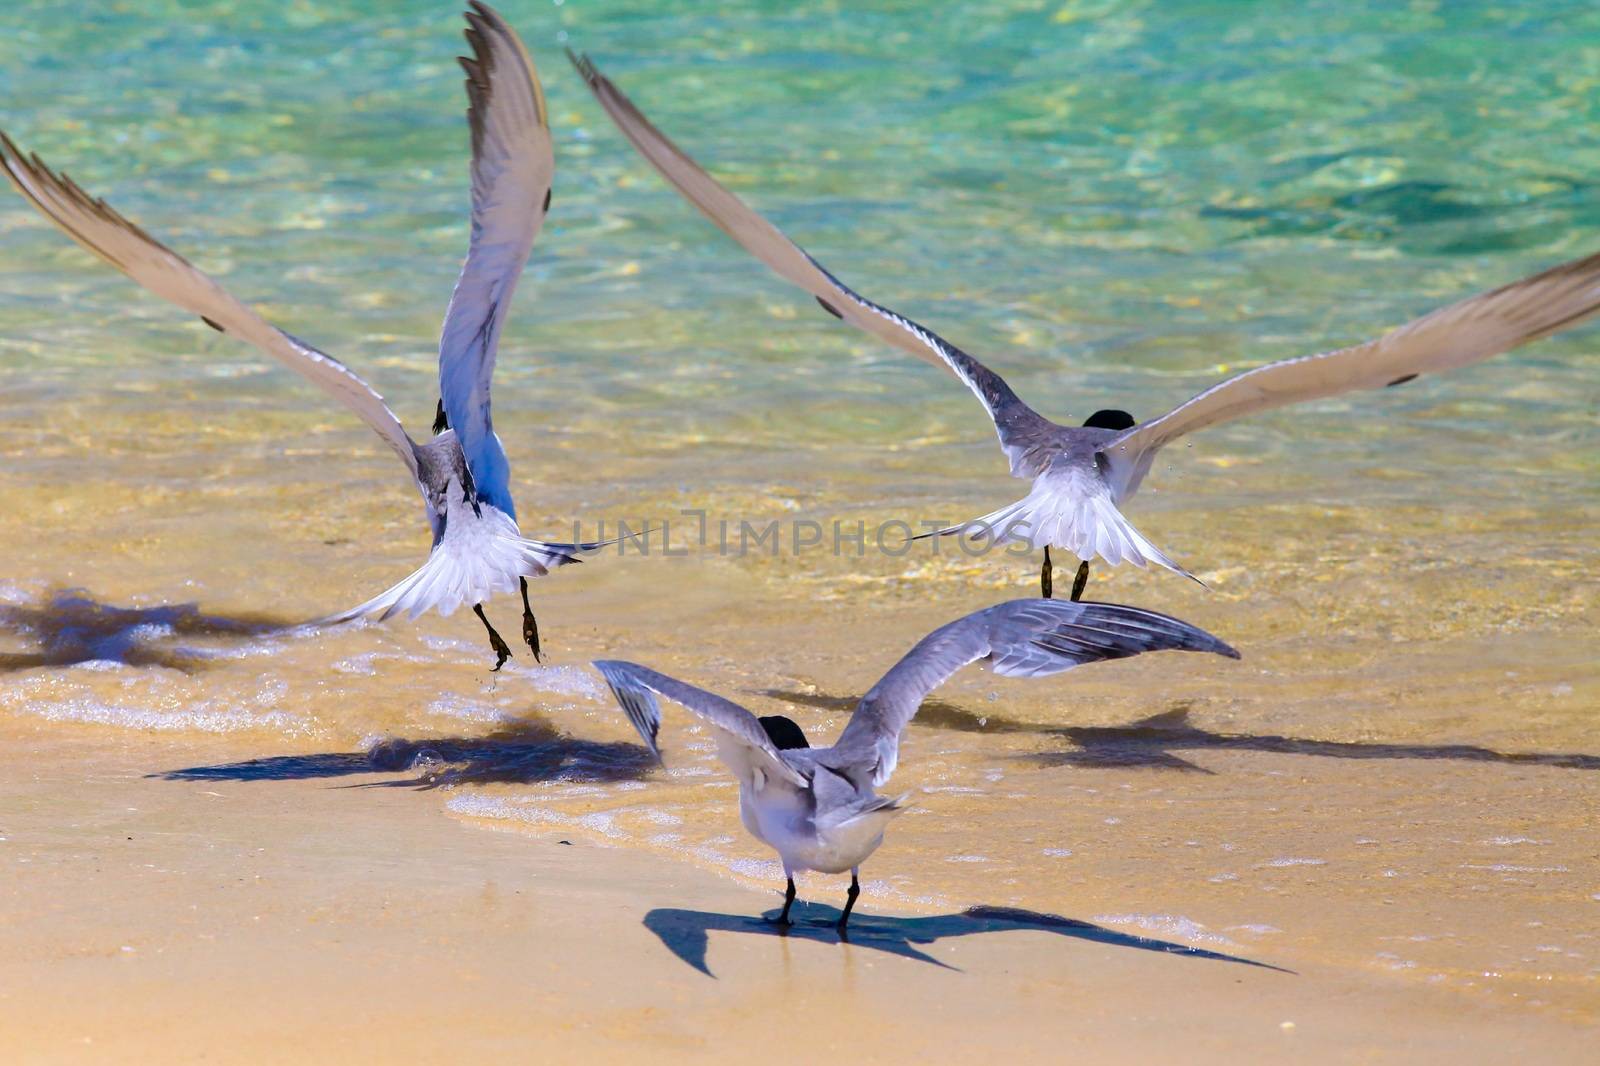 Group of 3 terns taking off from the beach on Great Keppel Island, Australia.